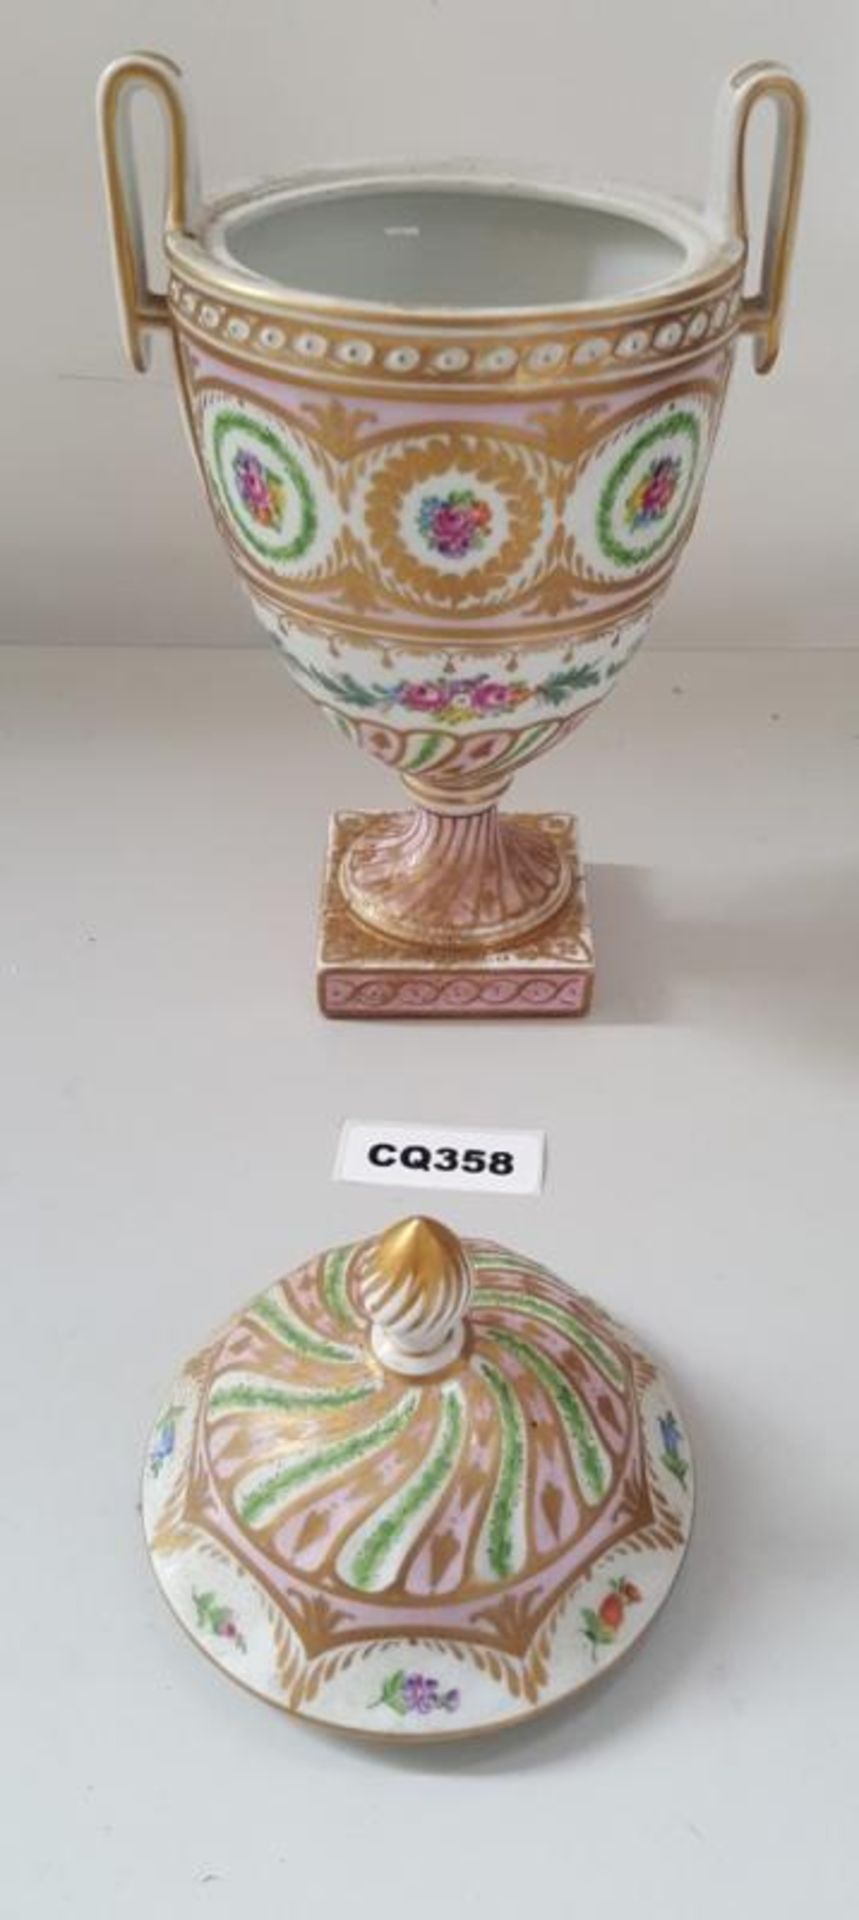 1 x ANTIQUE DRESDEN PORCELAIN TWIN HANDLE VASE IN GOLD AND WHITE - Ref CQ358 E - CL334 - Location: A - Image 3 of 3